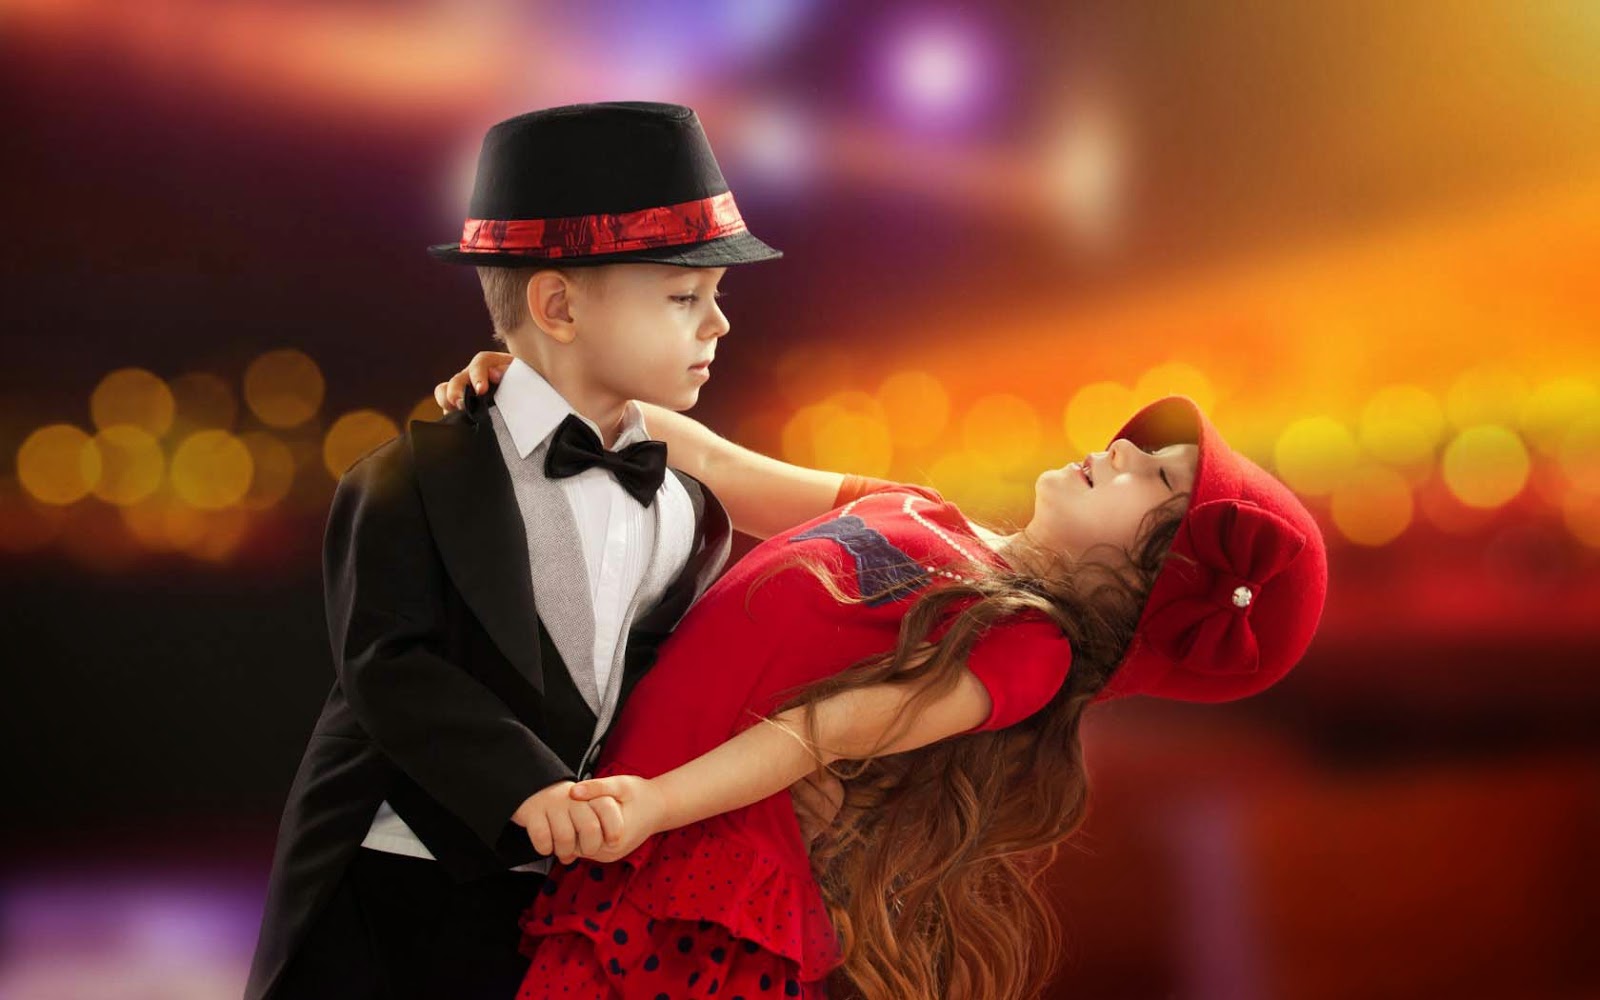 Cute Child Couple Wallpapers : Find best latest Cute Child Couple